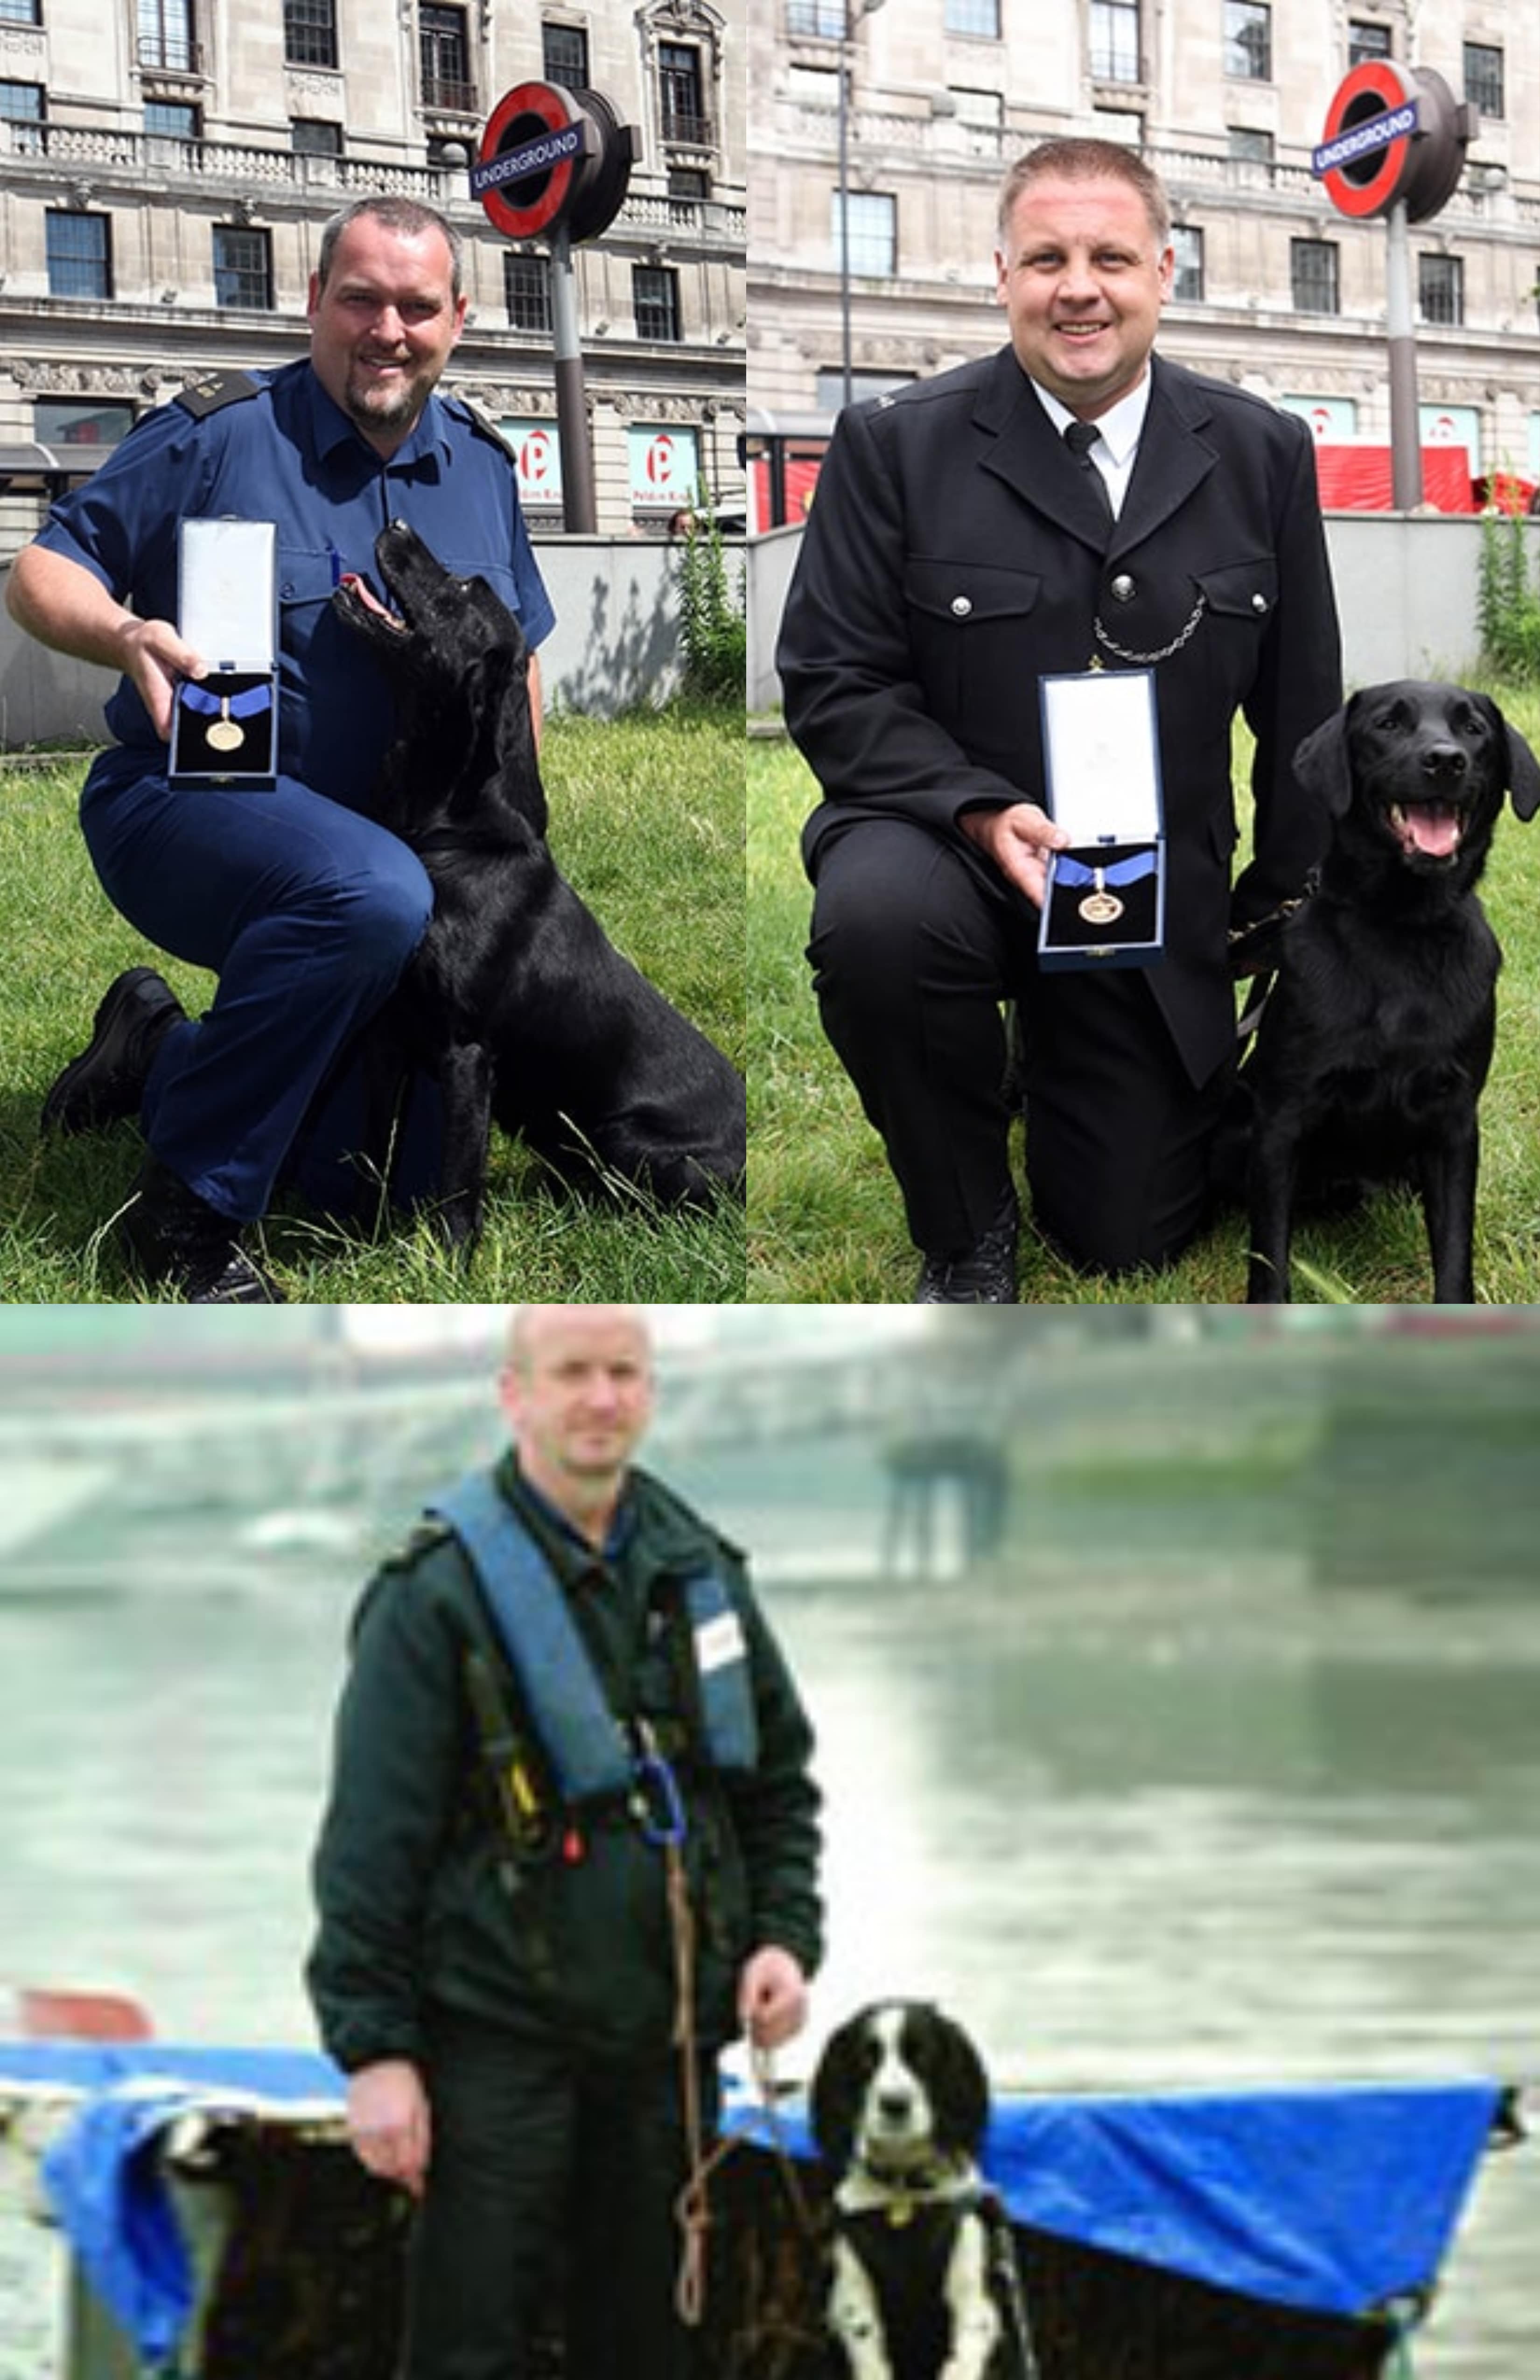 Photos of Police Dogs Billy, Vinnie and Hubble Keck (Jake) with their handlers and their medals